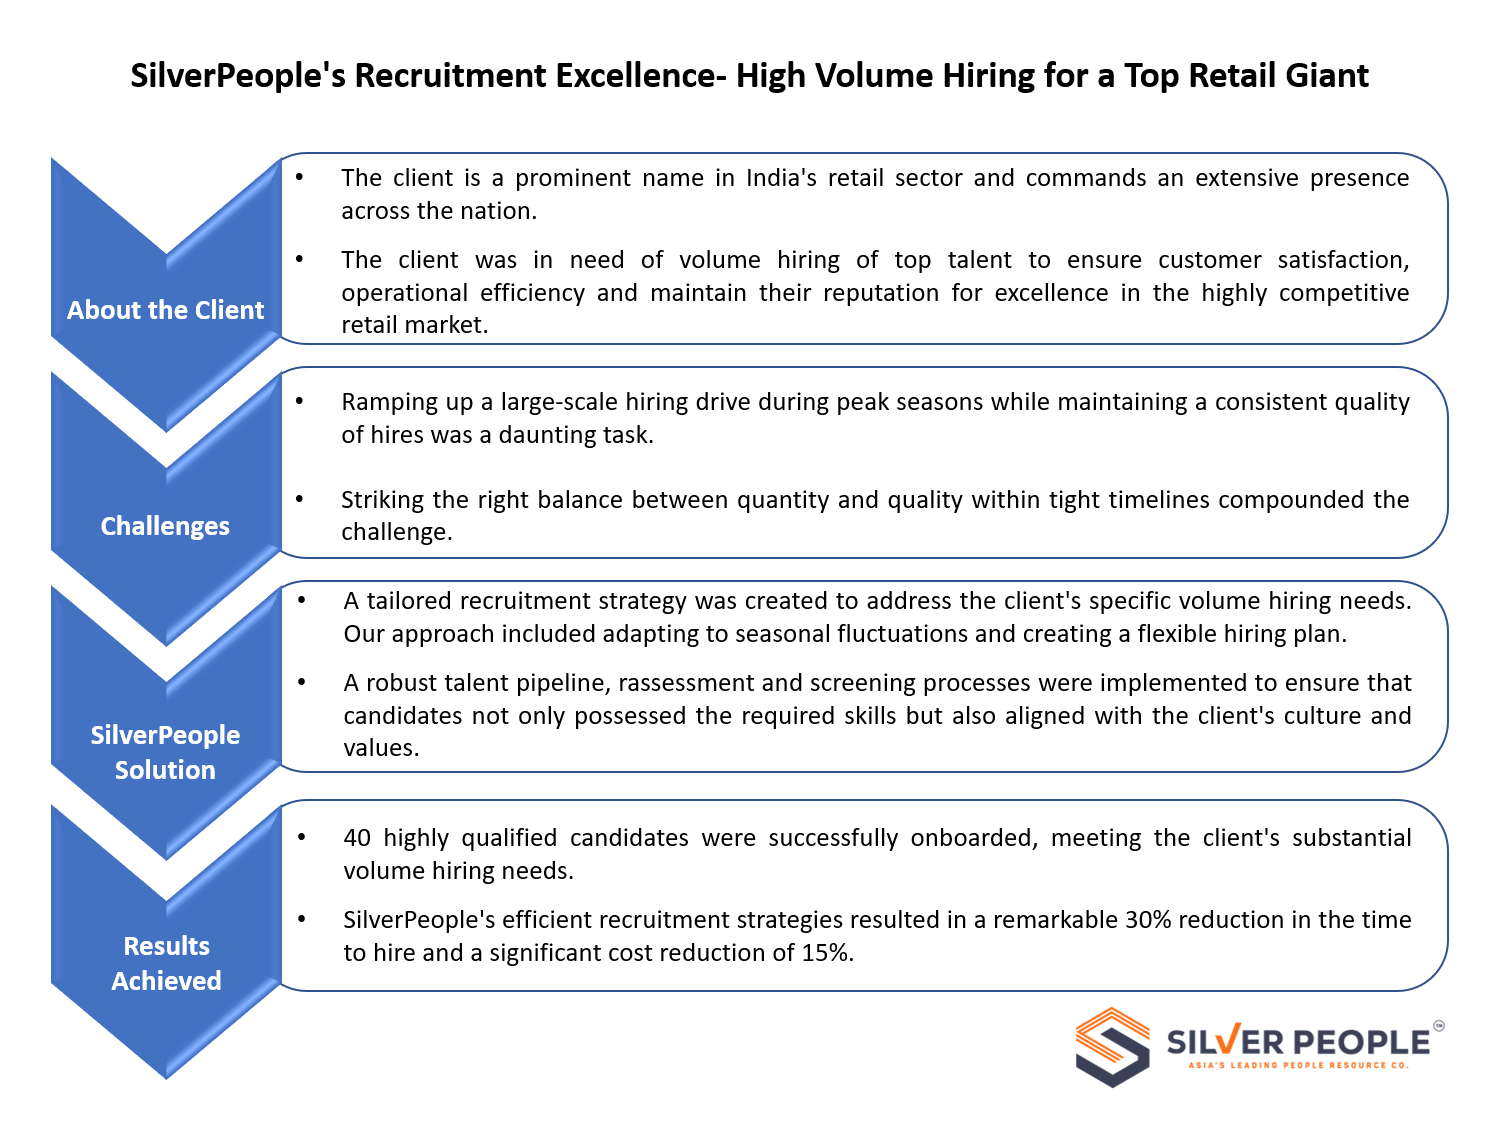 SilverPeople Recruitment Excellence- High Volume Hiring for a Top Retail Giant